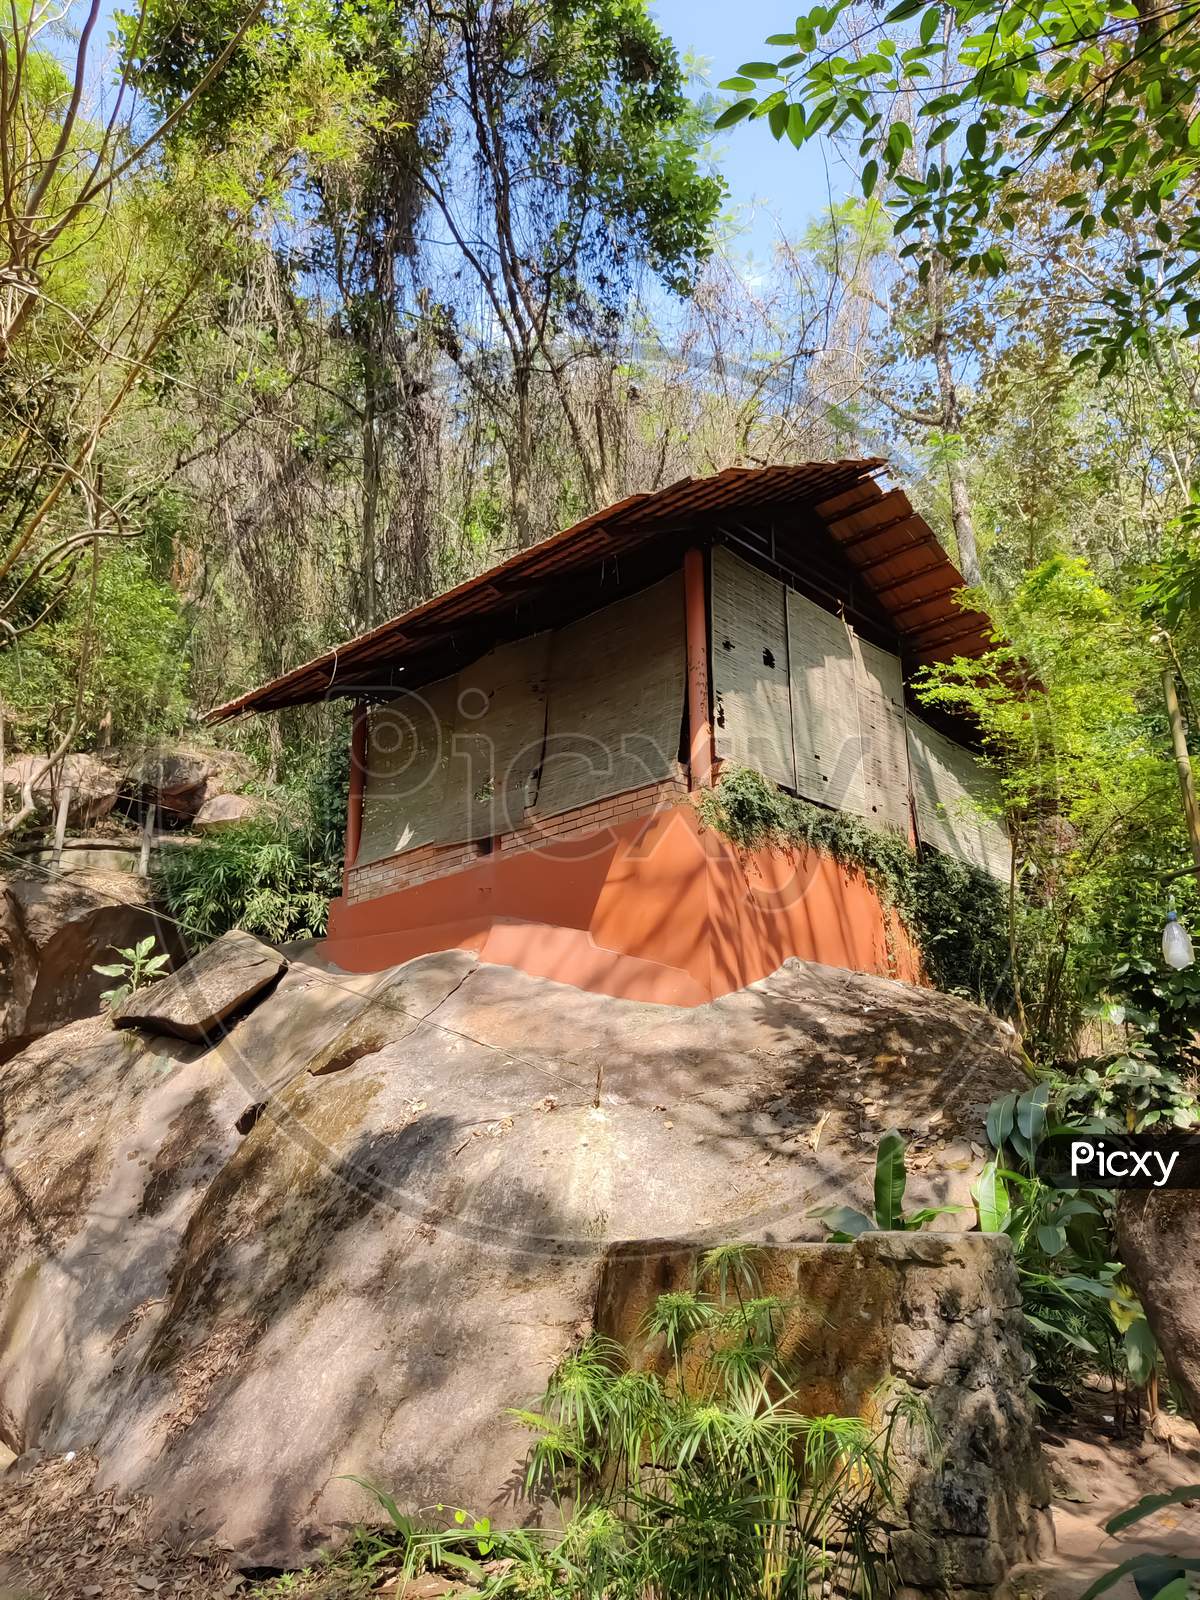 Ancient Home Over The Rocks In The Forest